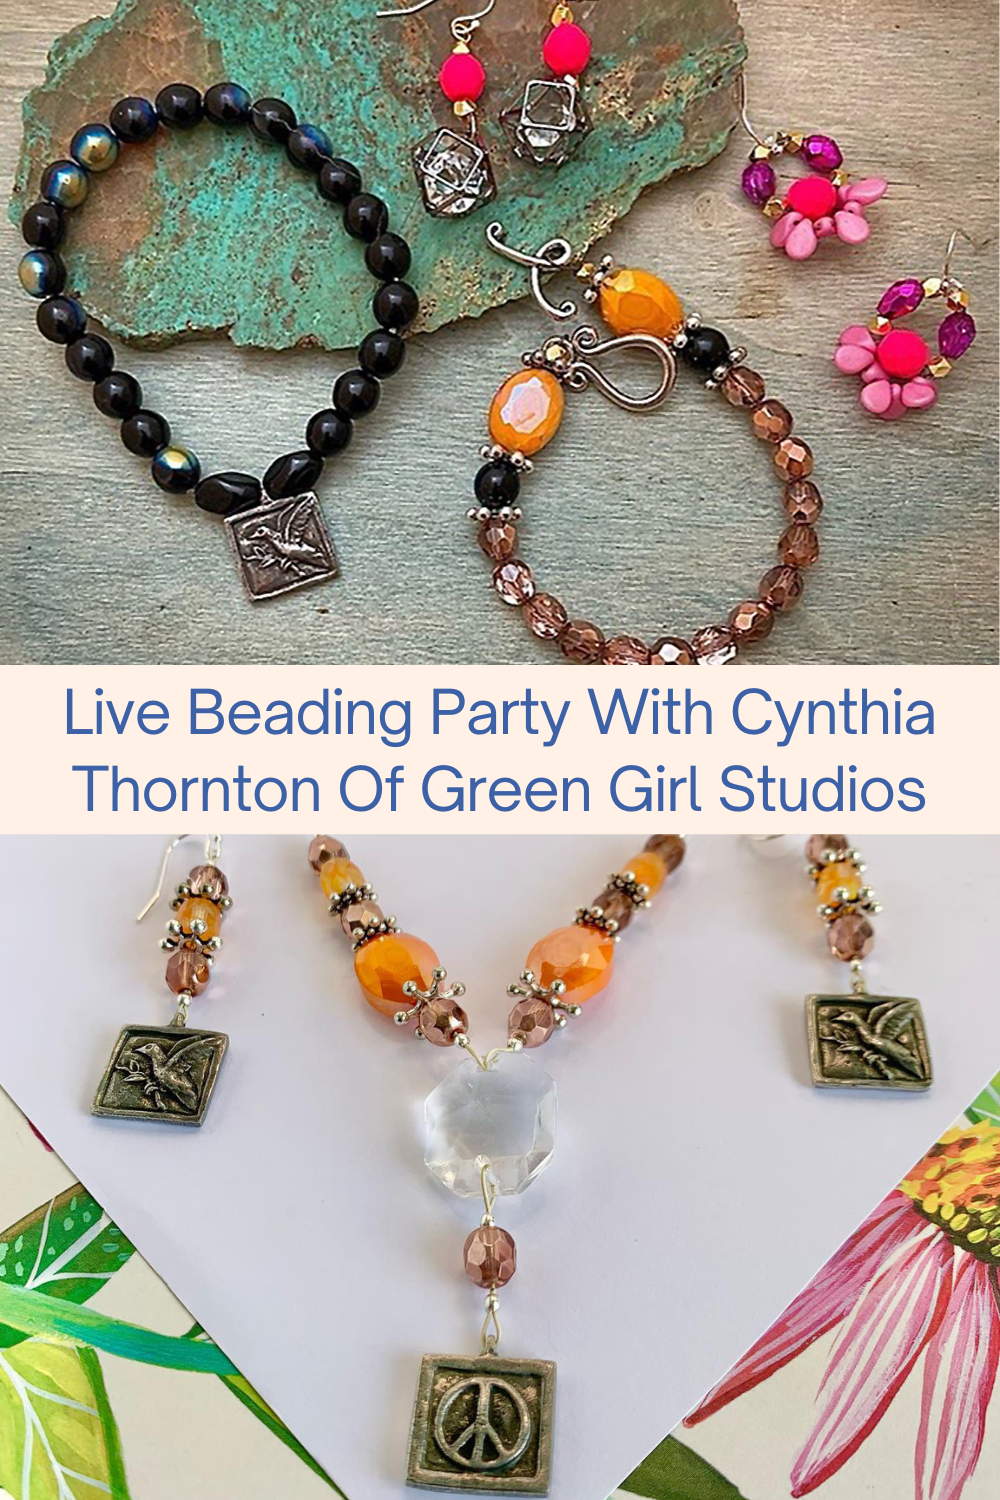 Live Beading Party With Cynthia Thornton Of Green Girl Studios Collage